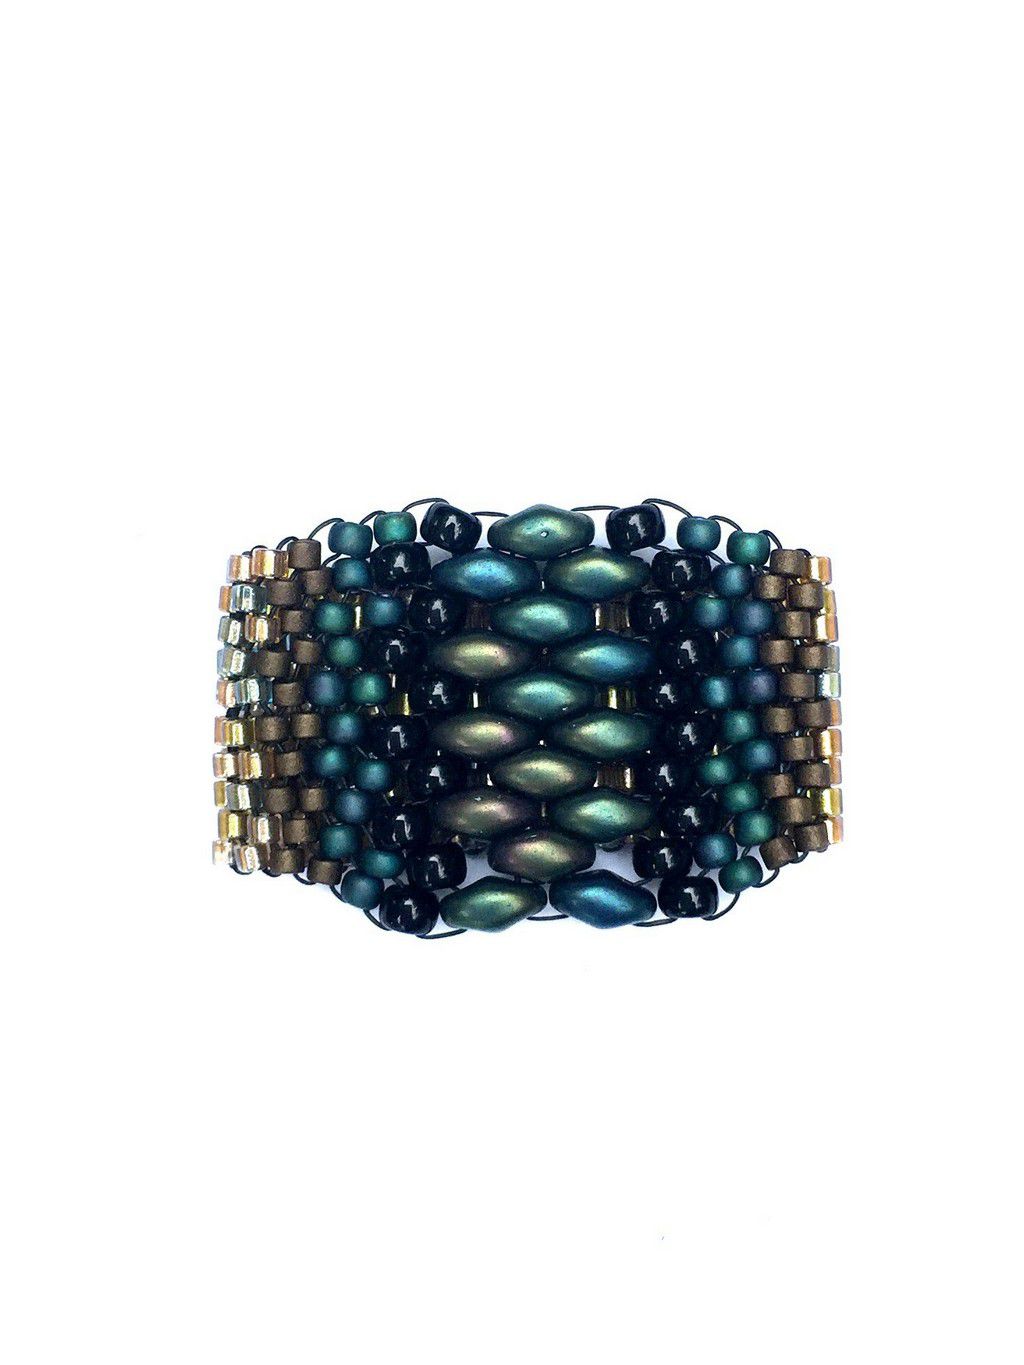 wide band ring fully beaded in green, black, bronze, and gold, super comfortable